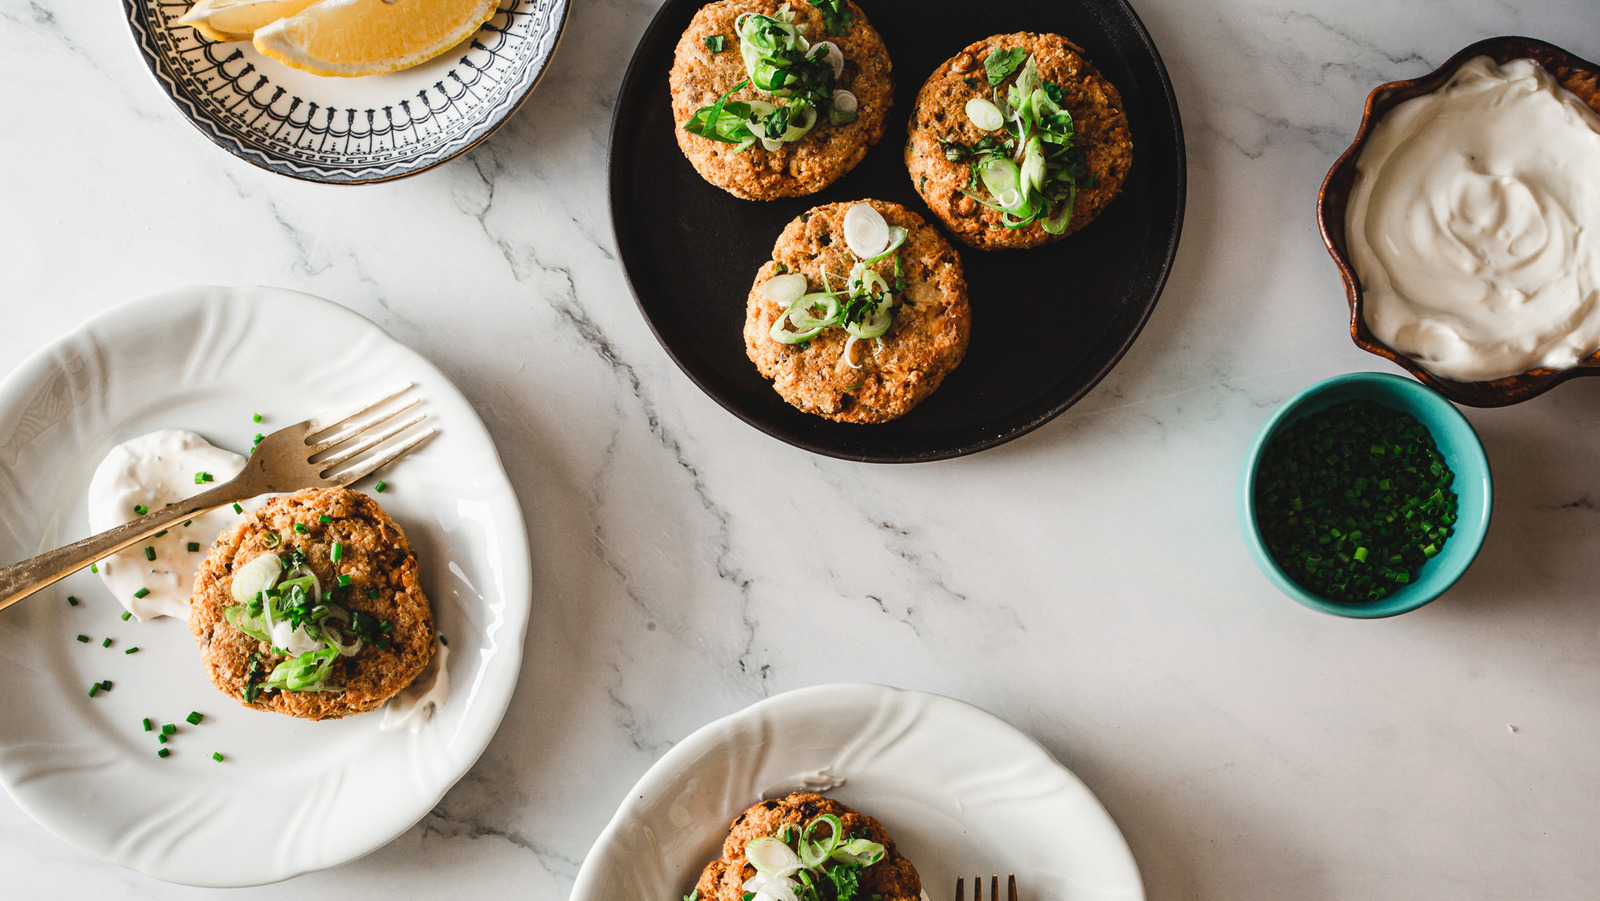 https://www.mashed.com/img/gallery/15-minute-air-fryer-salmon-cakes-recipe/l-intro-1628207780.jpg